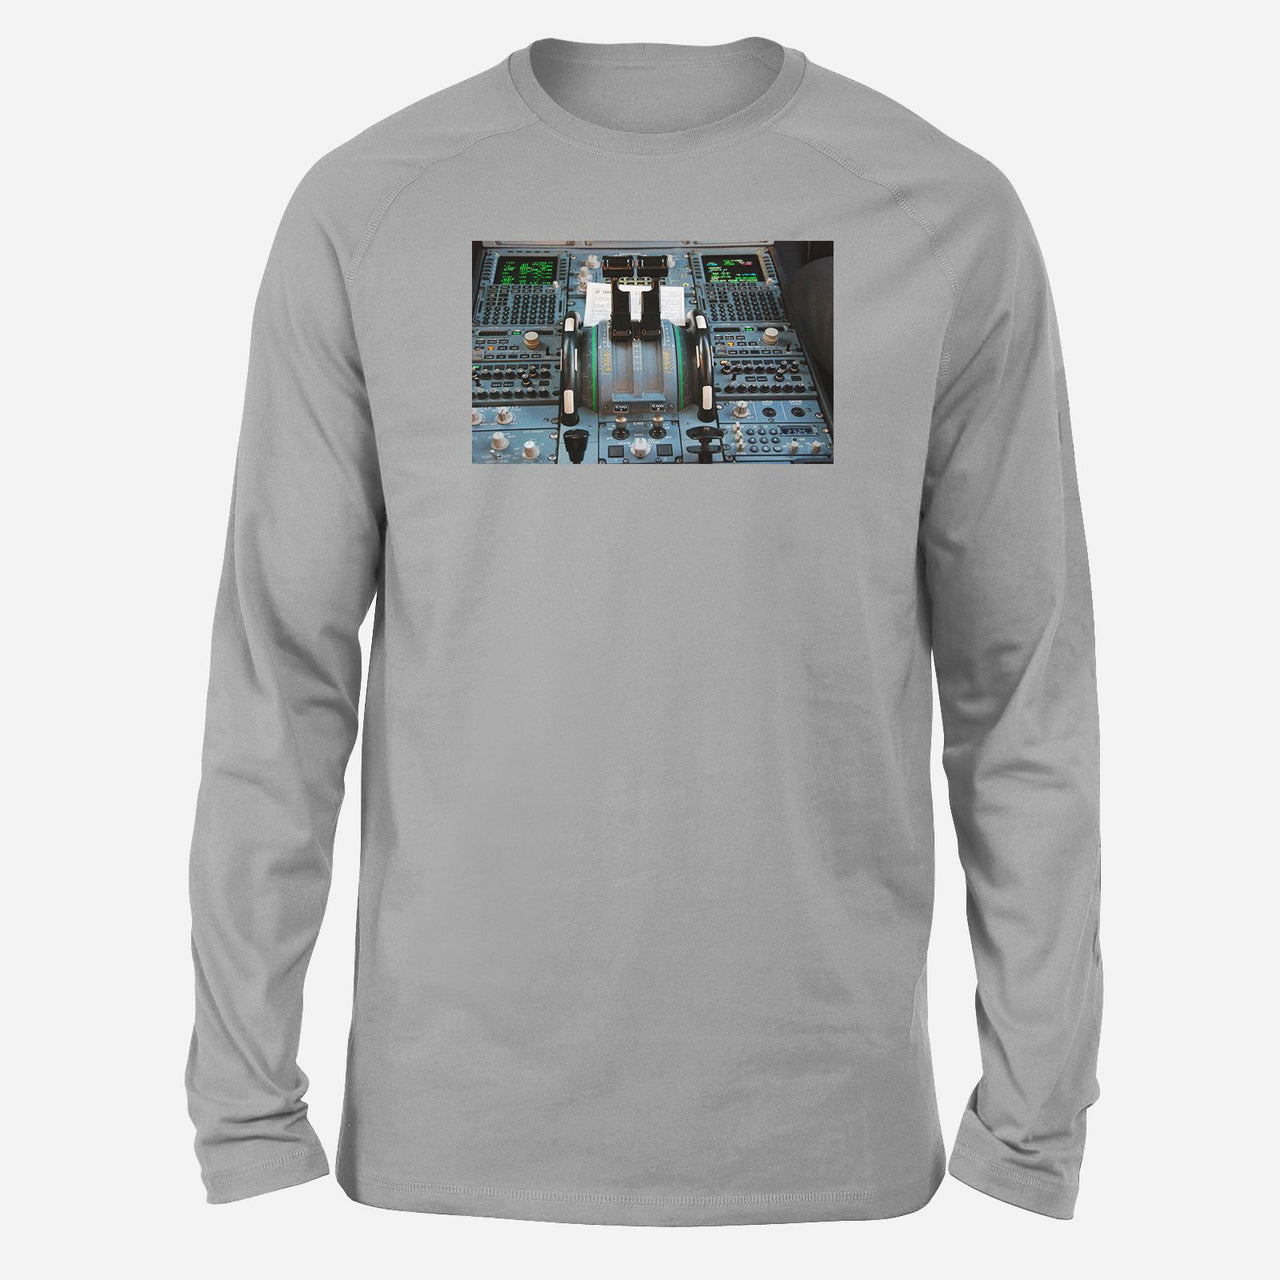 Airbus A320 Cockpit Designed Long-Sleeve T-Shirts